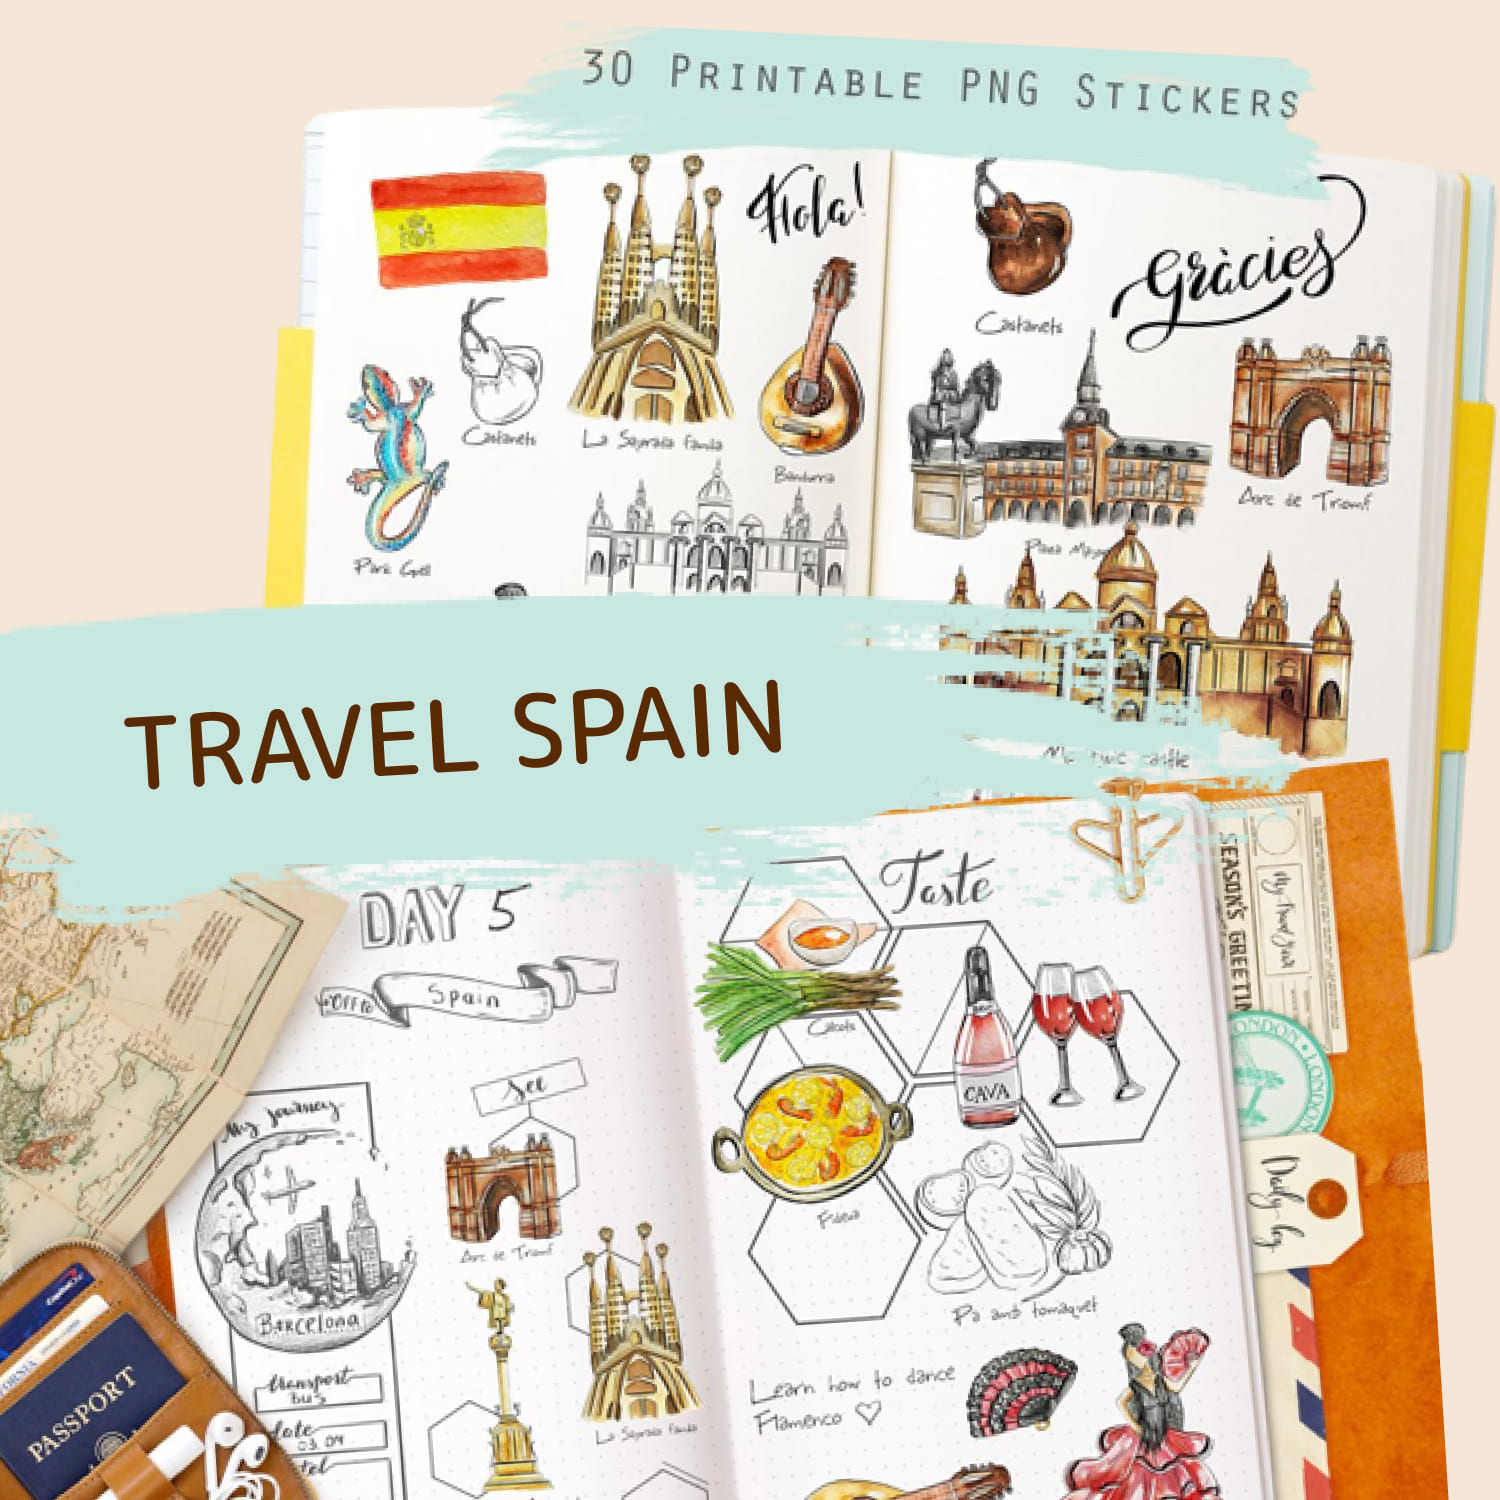 Prints of travel spain clipart.